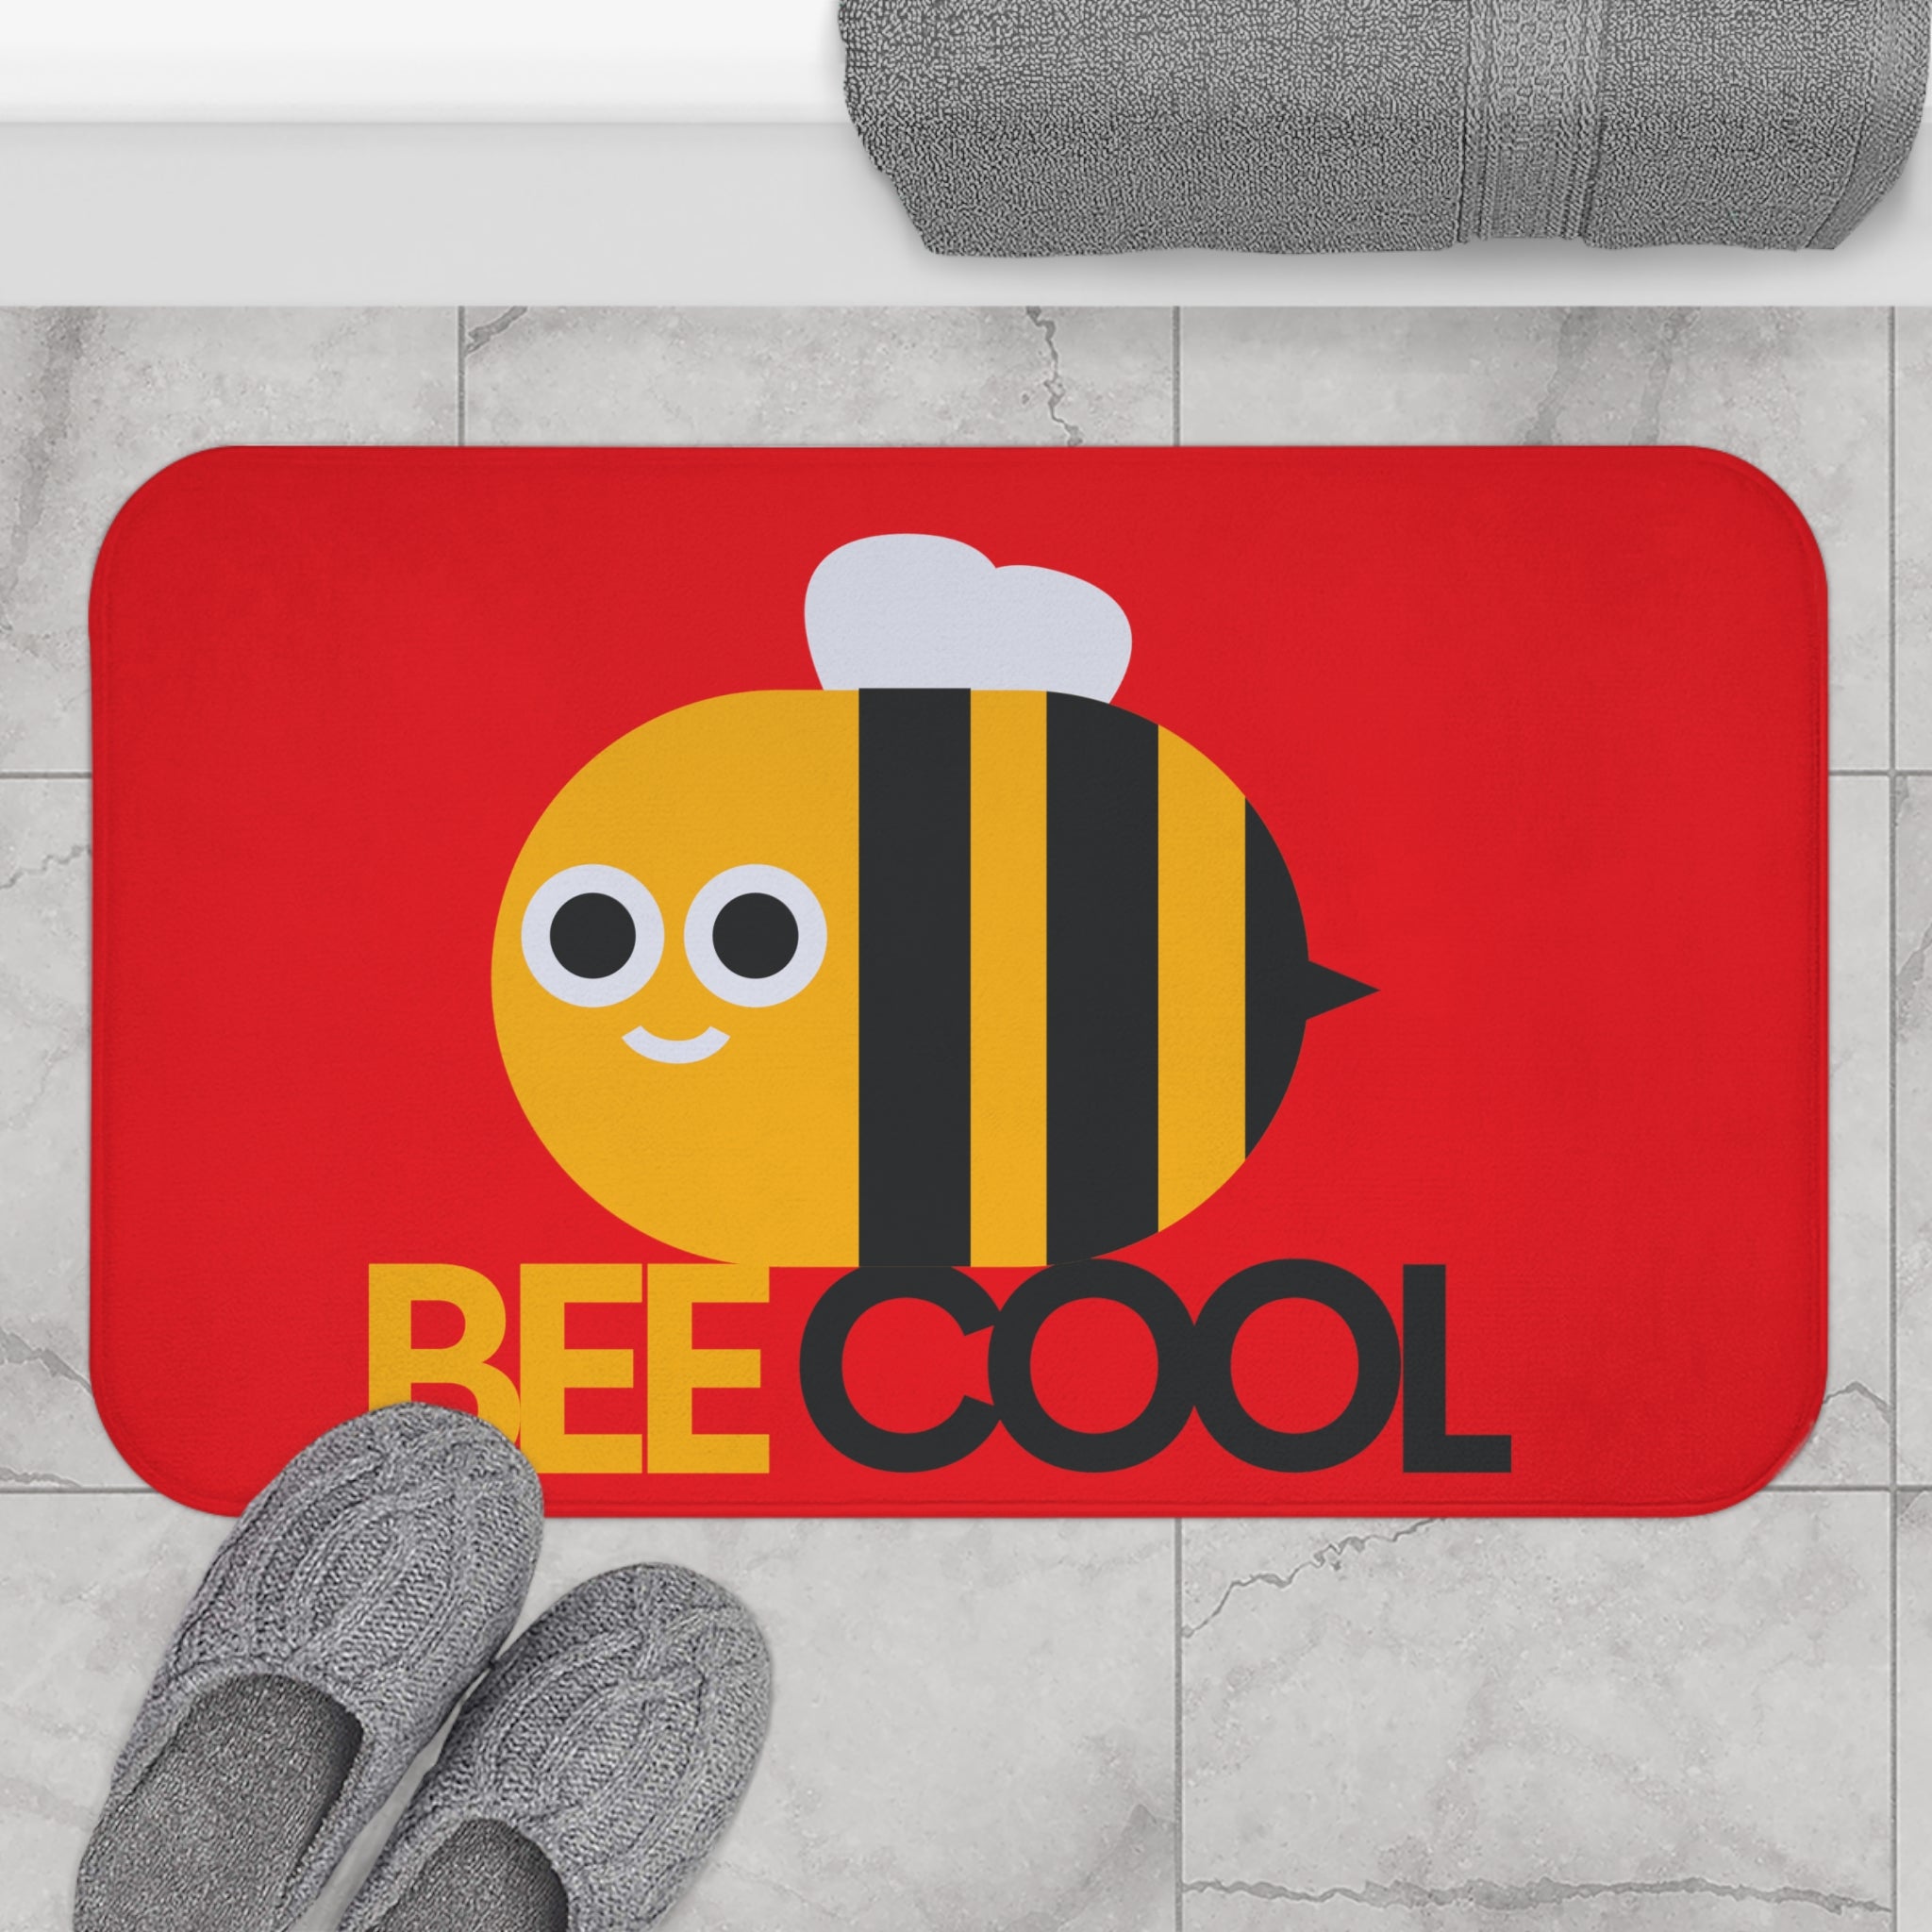 Bee Cool Bath Mat - MG Bath Products Bath mat with a large bee and a red background.Home Decor